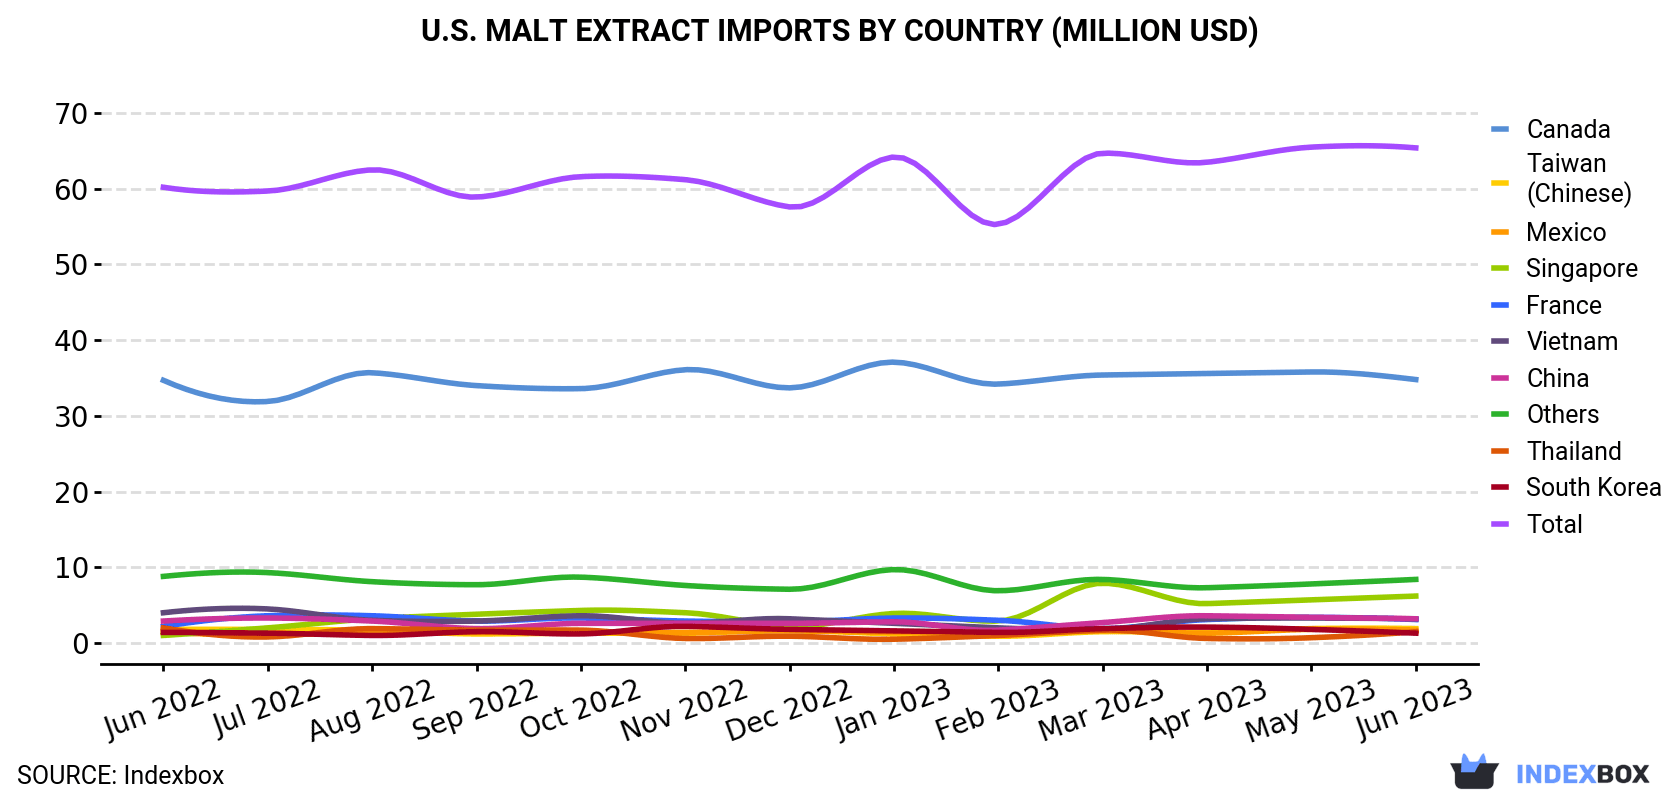 U.S. Malt Extract Imports By Country (Million USD)